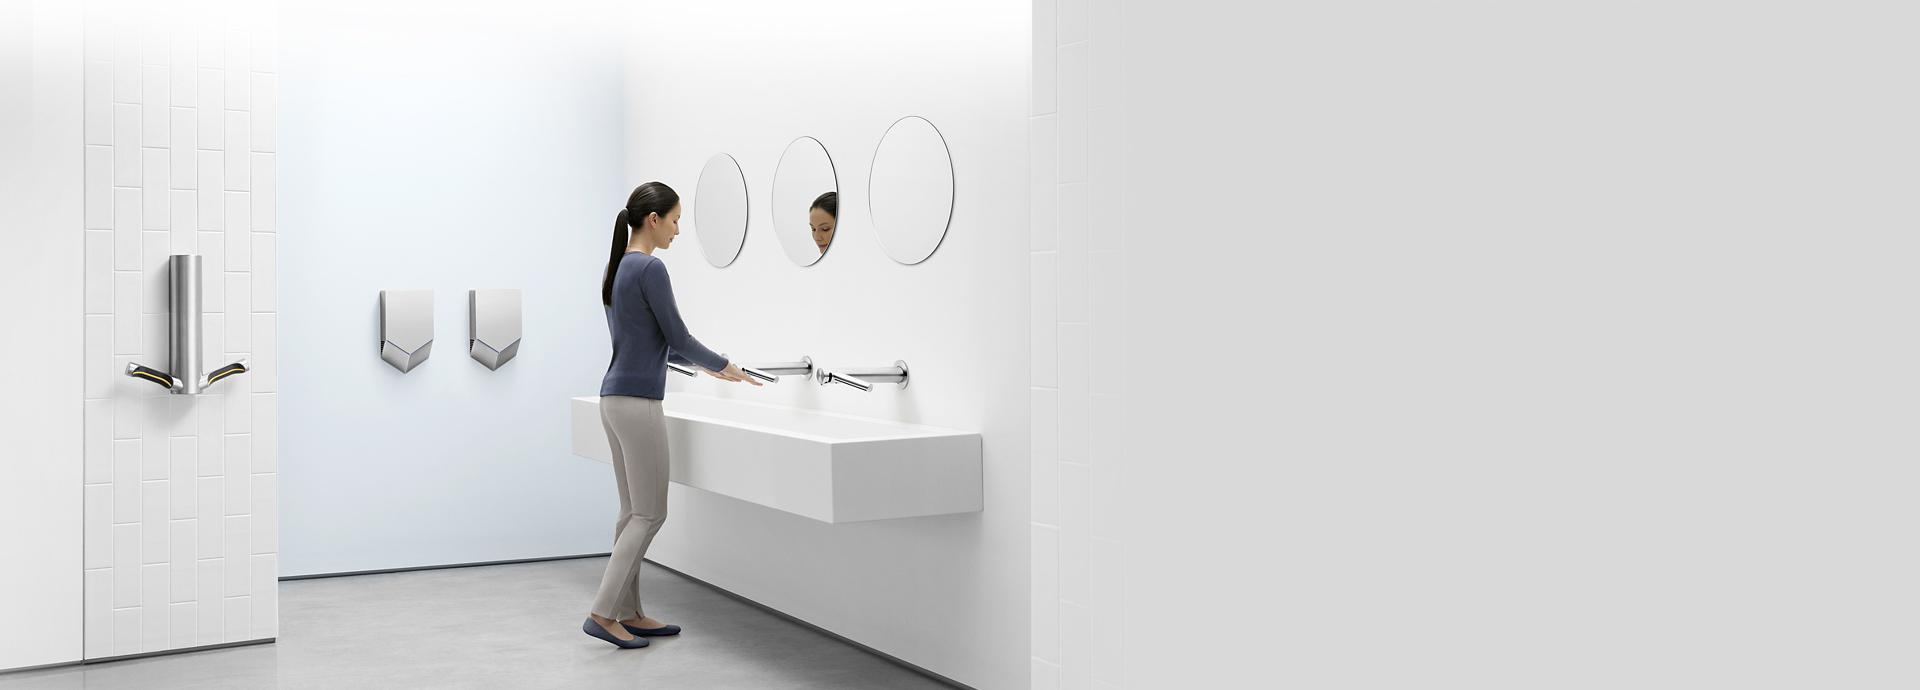 Dyson Airblade hand dryers mounted in a washroom